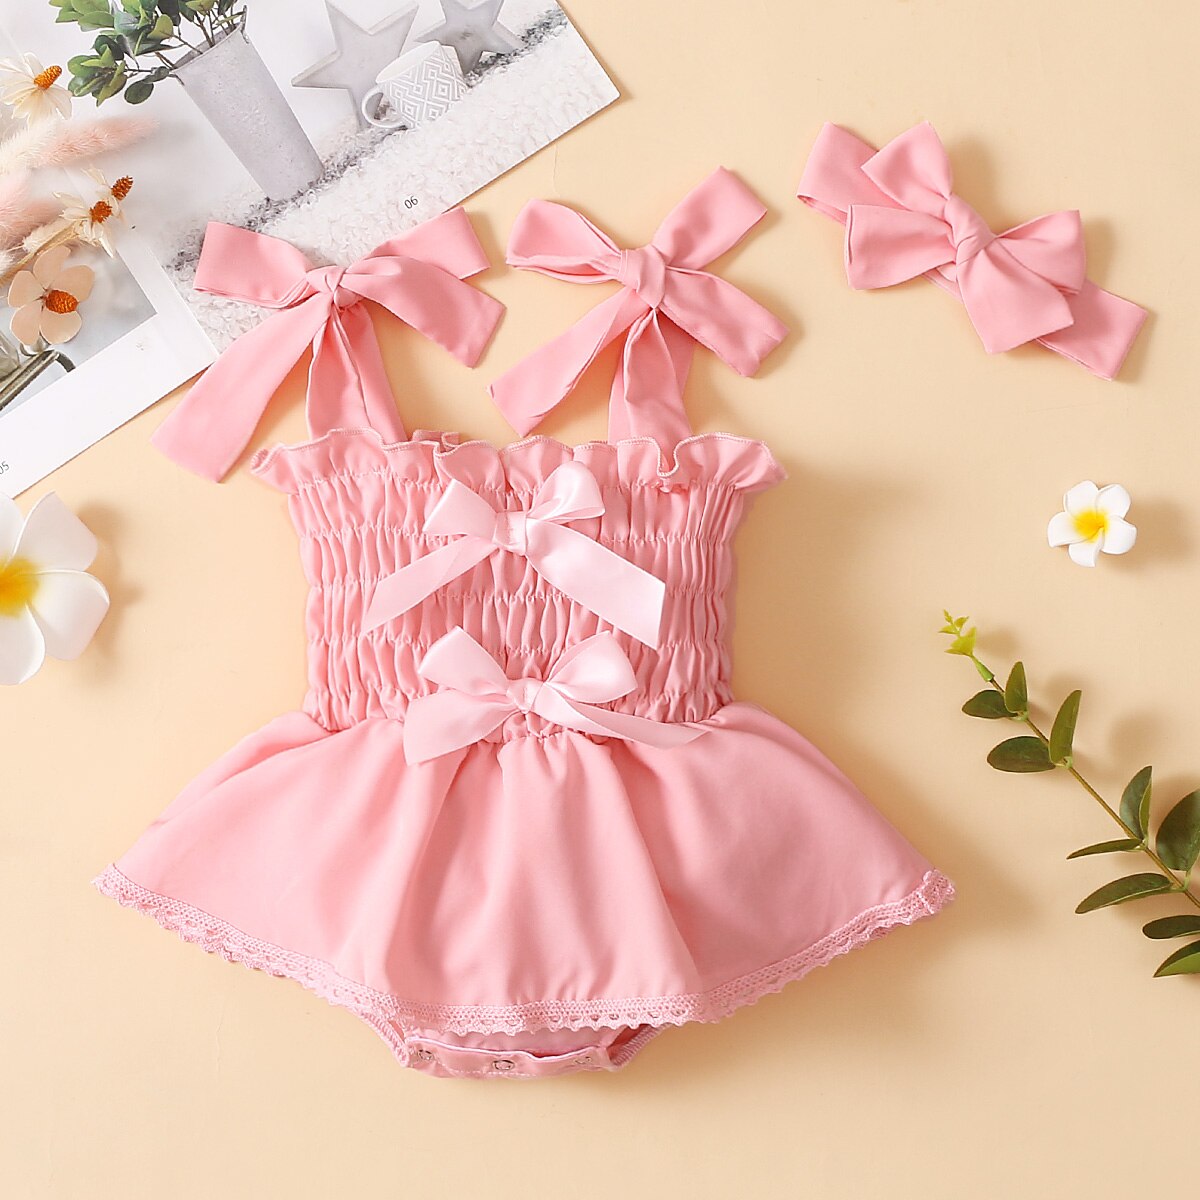 Infant-Newborn-Baby-Girls-Bodysuits-Dress-Elastic-Solid-Bowknot-Strap-Jumpsuit-Summer-Outfits-Tutu-Outfits-With-1